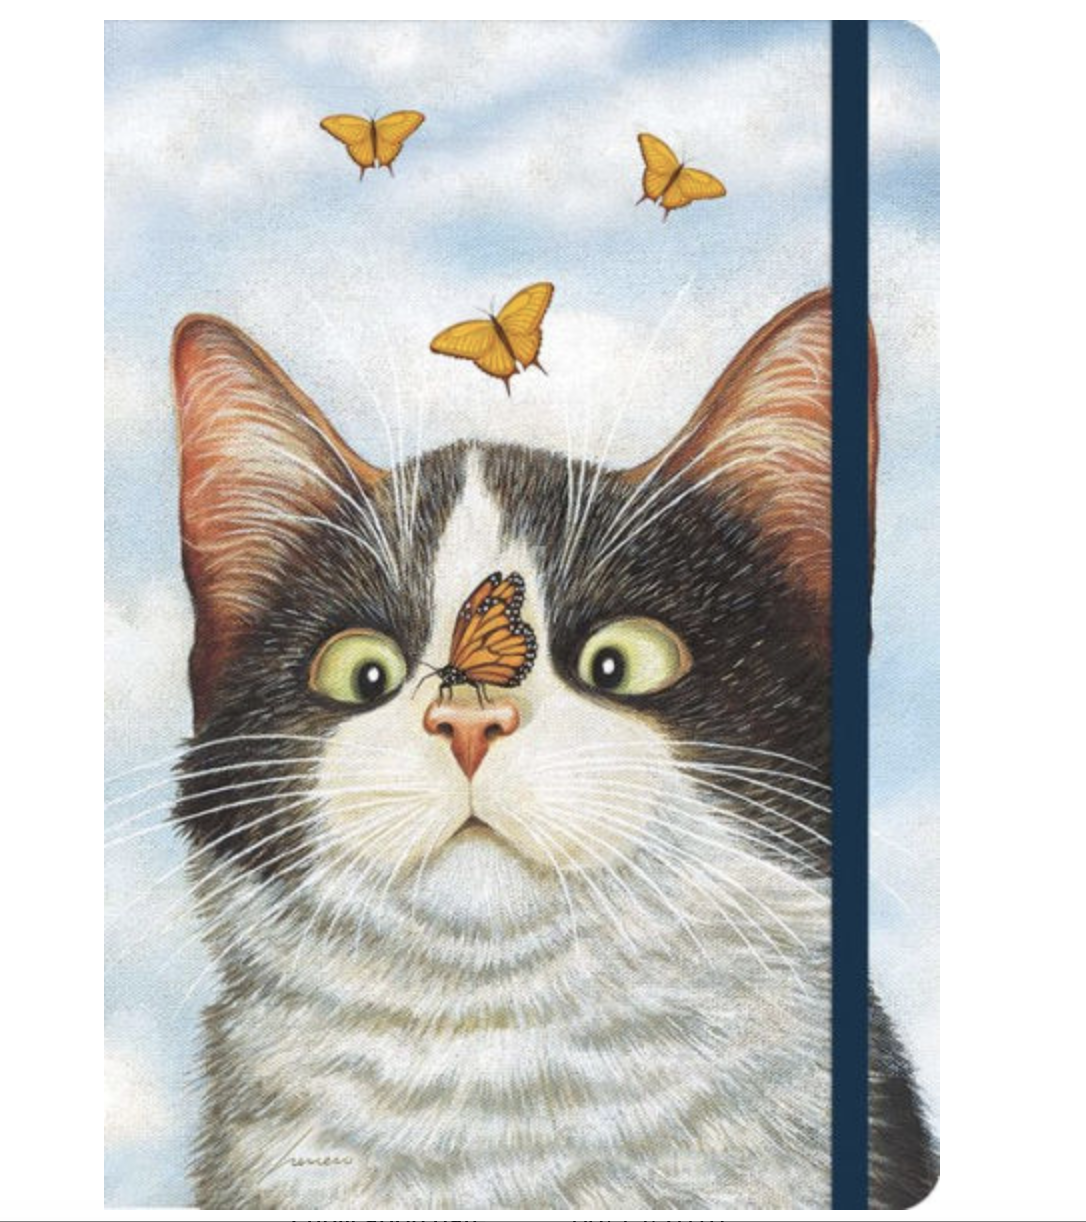 The cat journal cover showing a funny cat with a butterfly on its nose